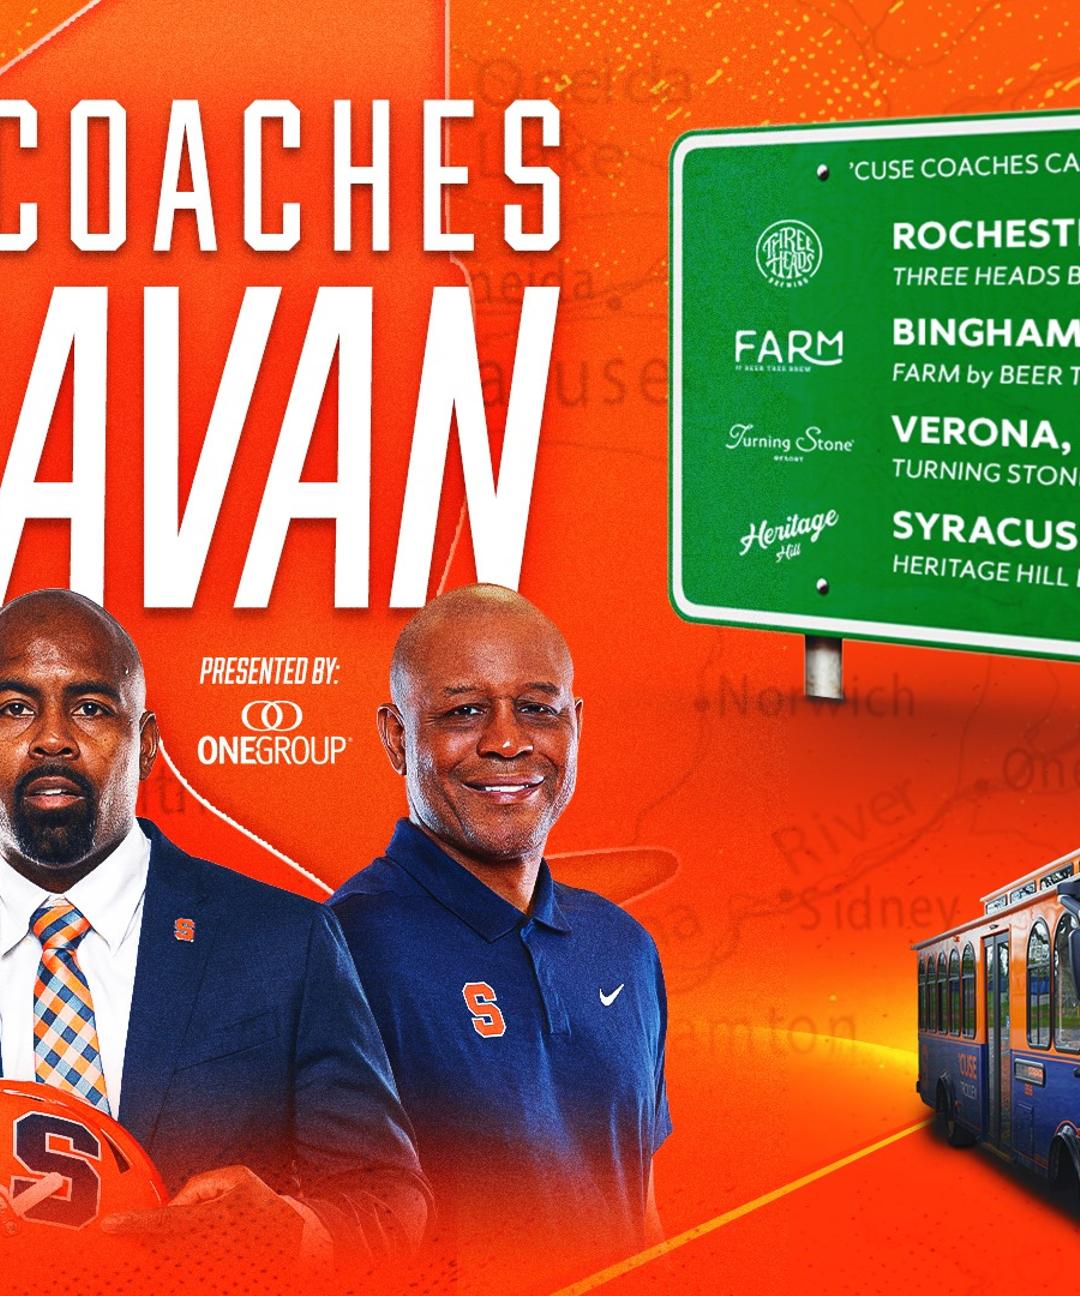 Image related to Coaches Caravan To Make Stops Across NY